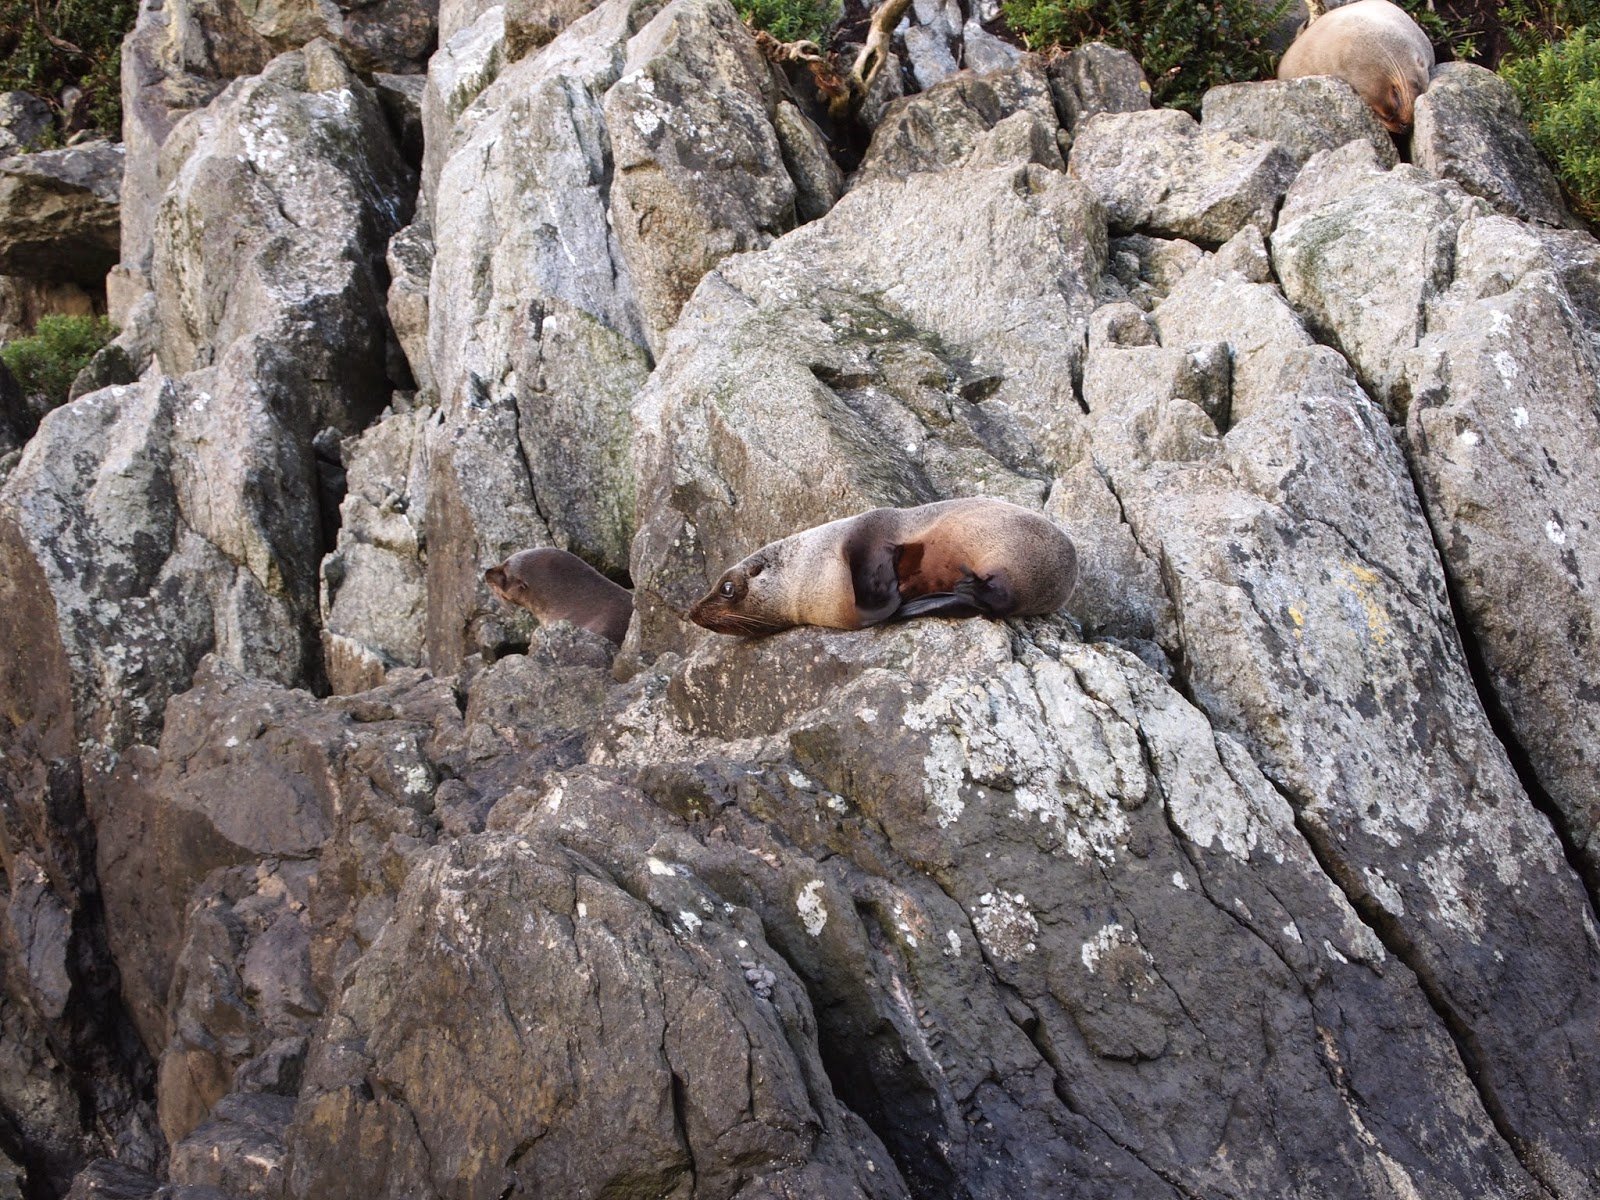 New Zealand Fur Seal in Milford Sound